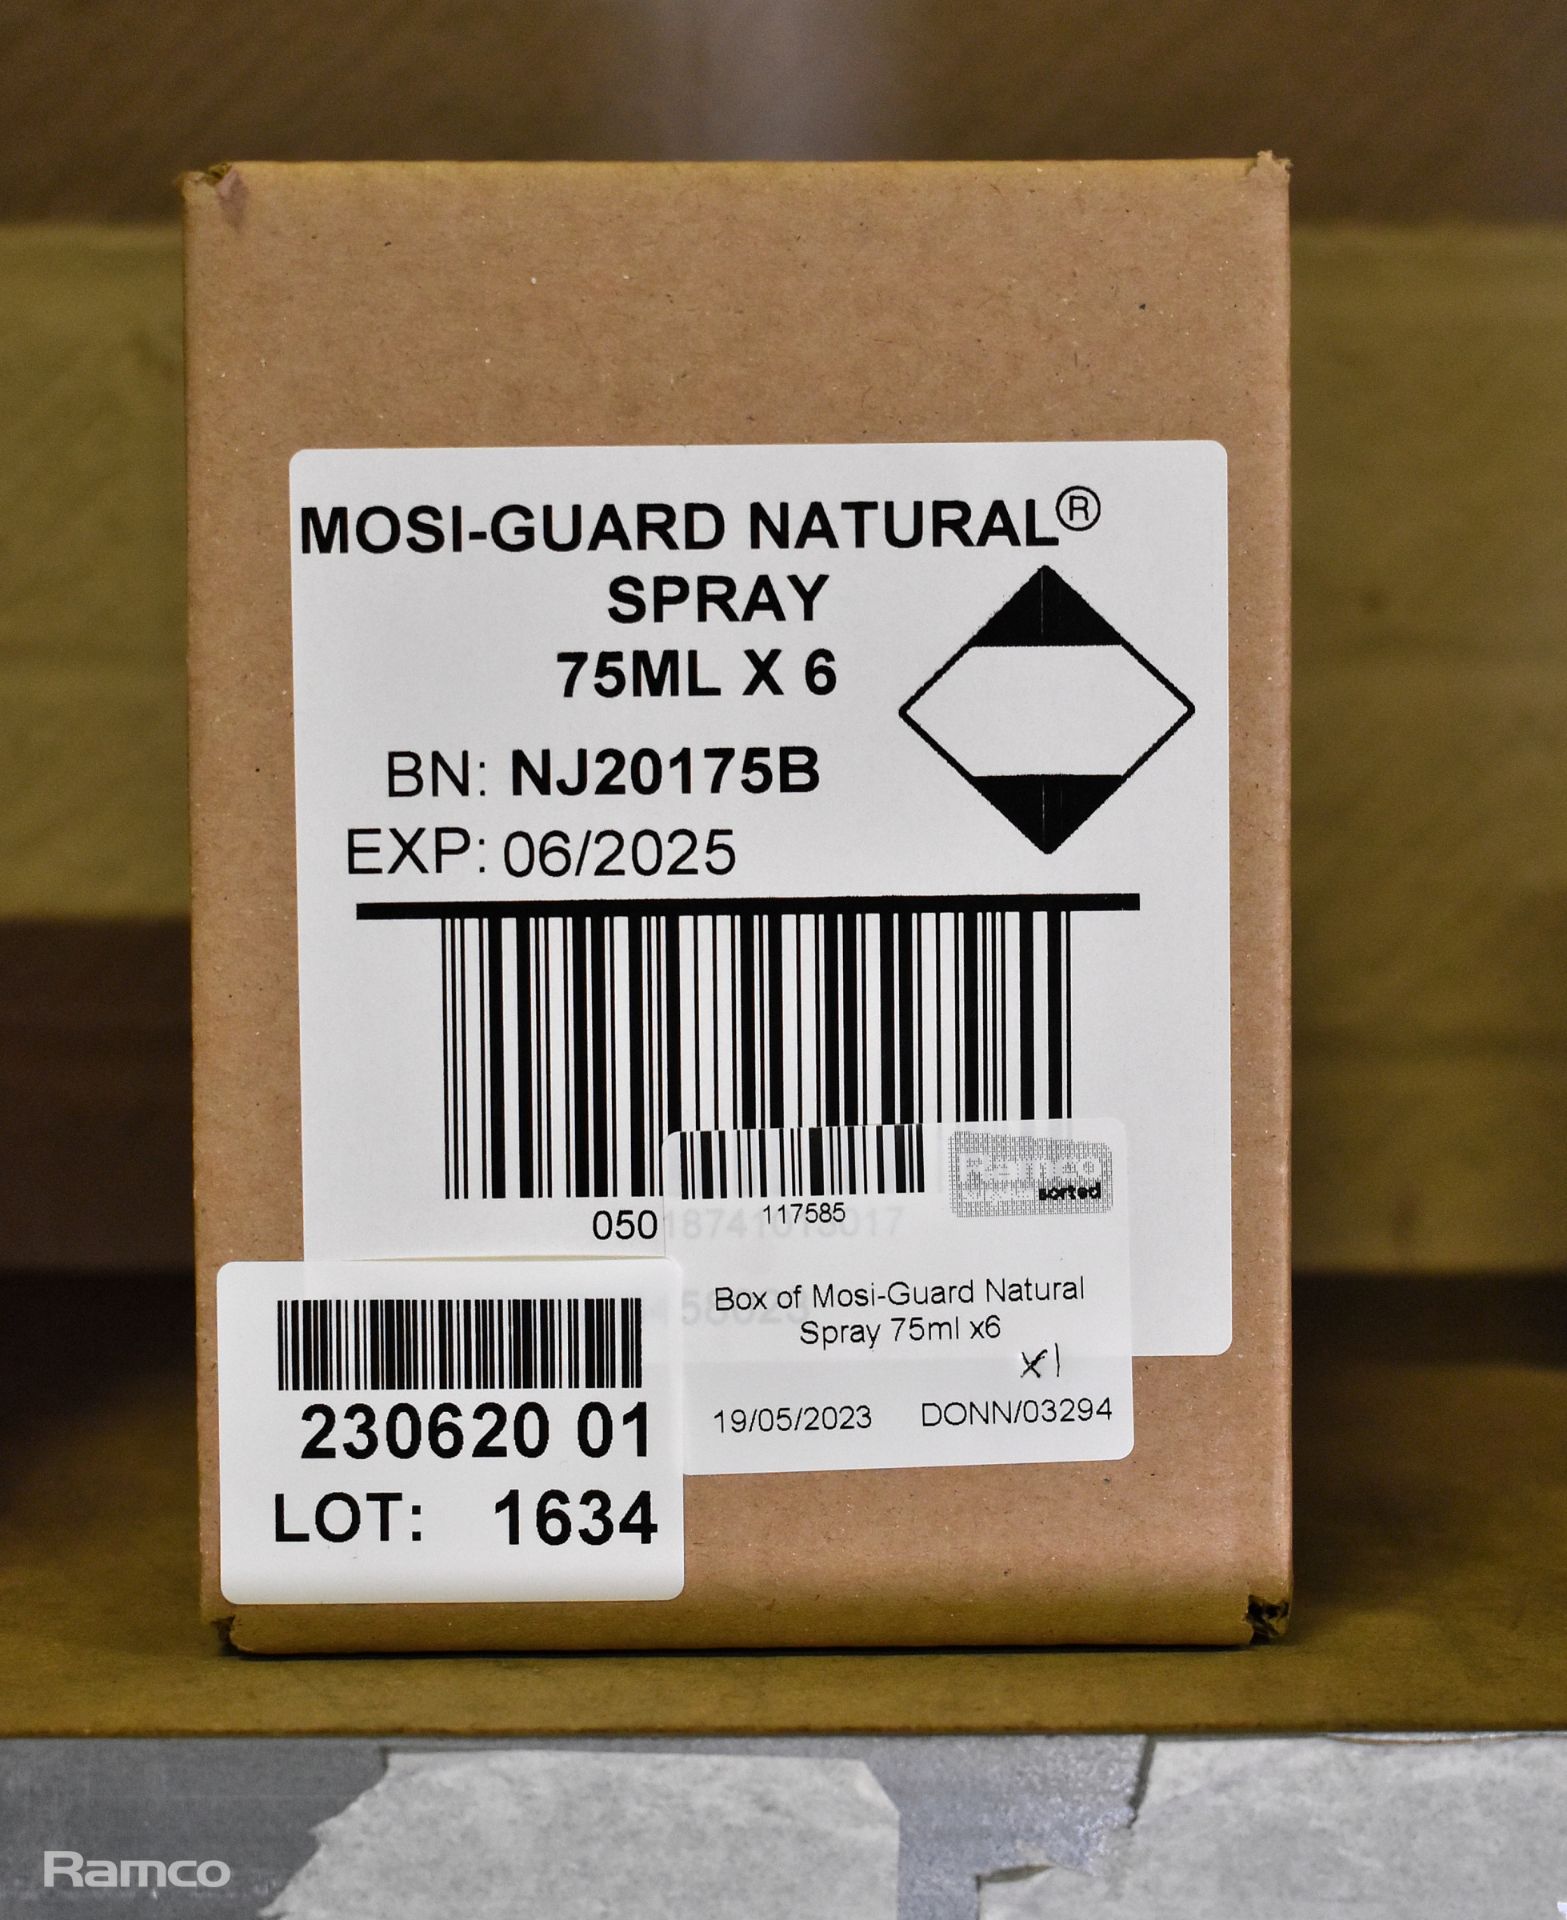 6x bottles of Mosi-Guard Natural Spray insect repellent 75ml - Image 2 of 2